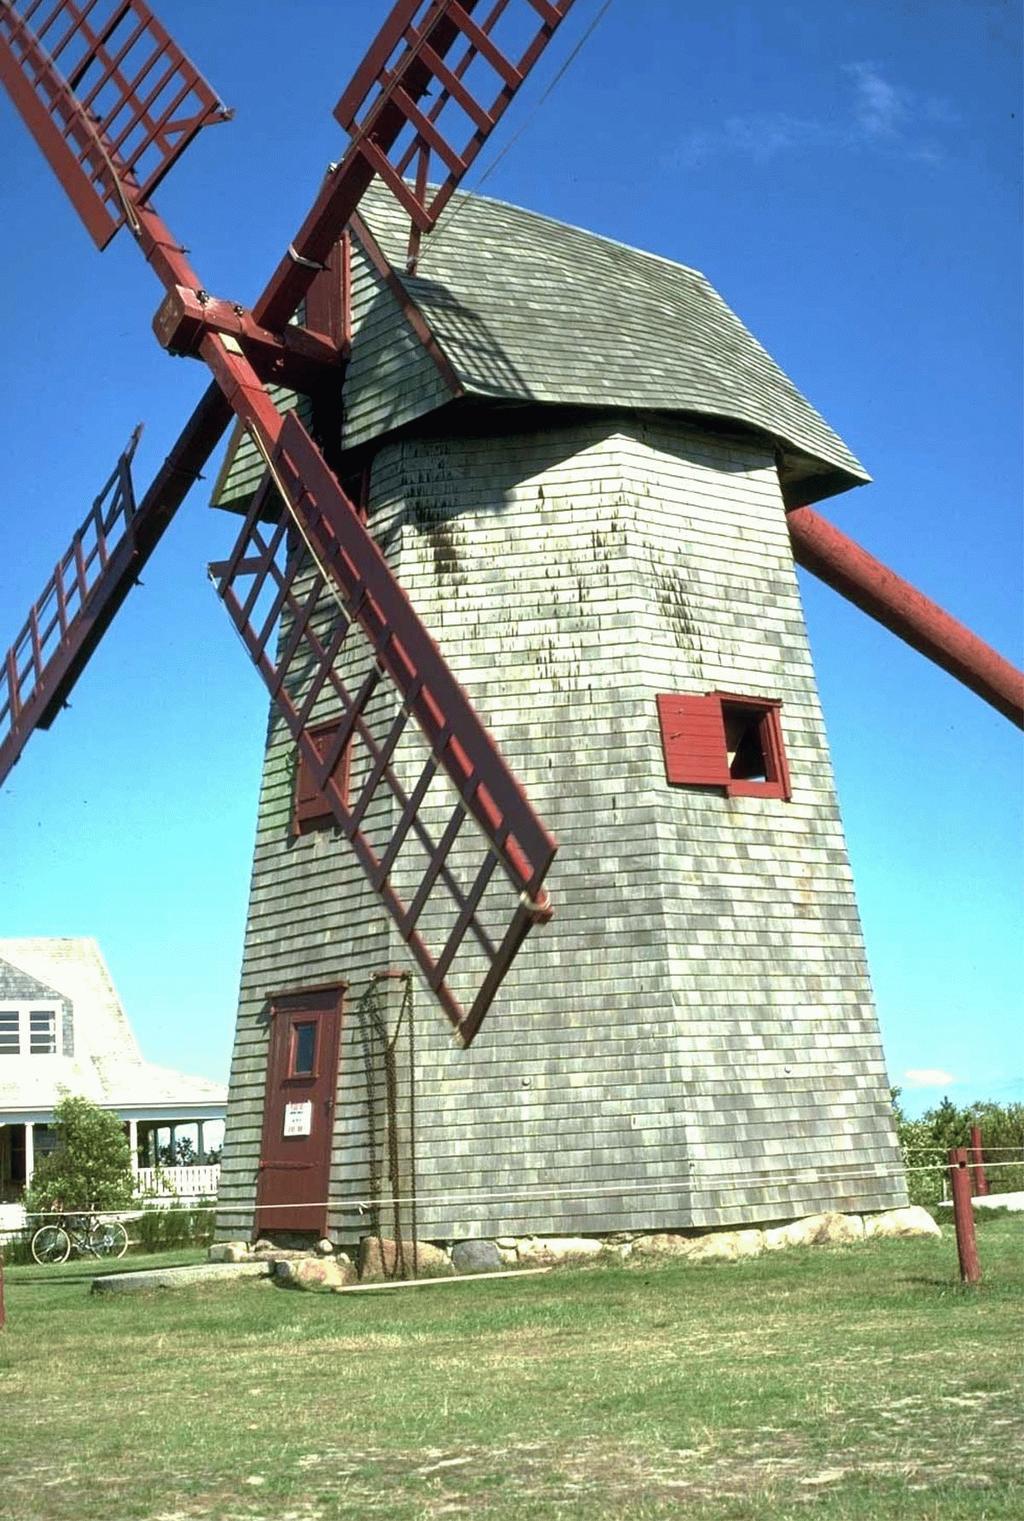 Solar Matters I Photos Wind Watching Old Mill in Nantucket Massachusetts, built in 1746.